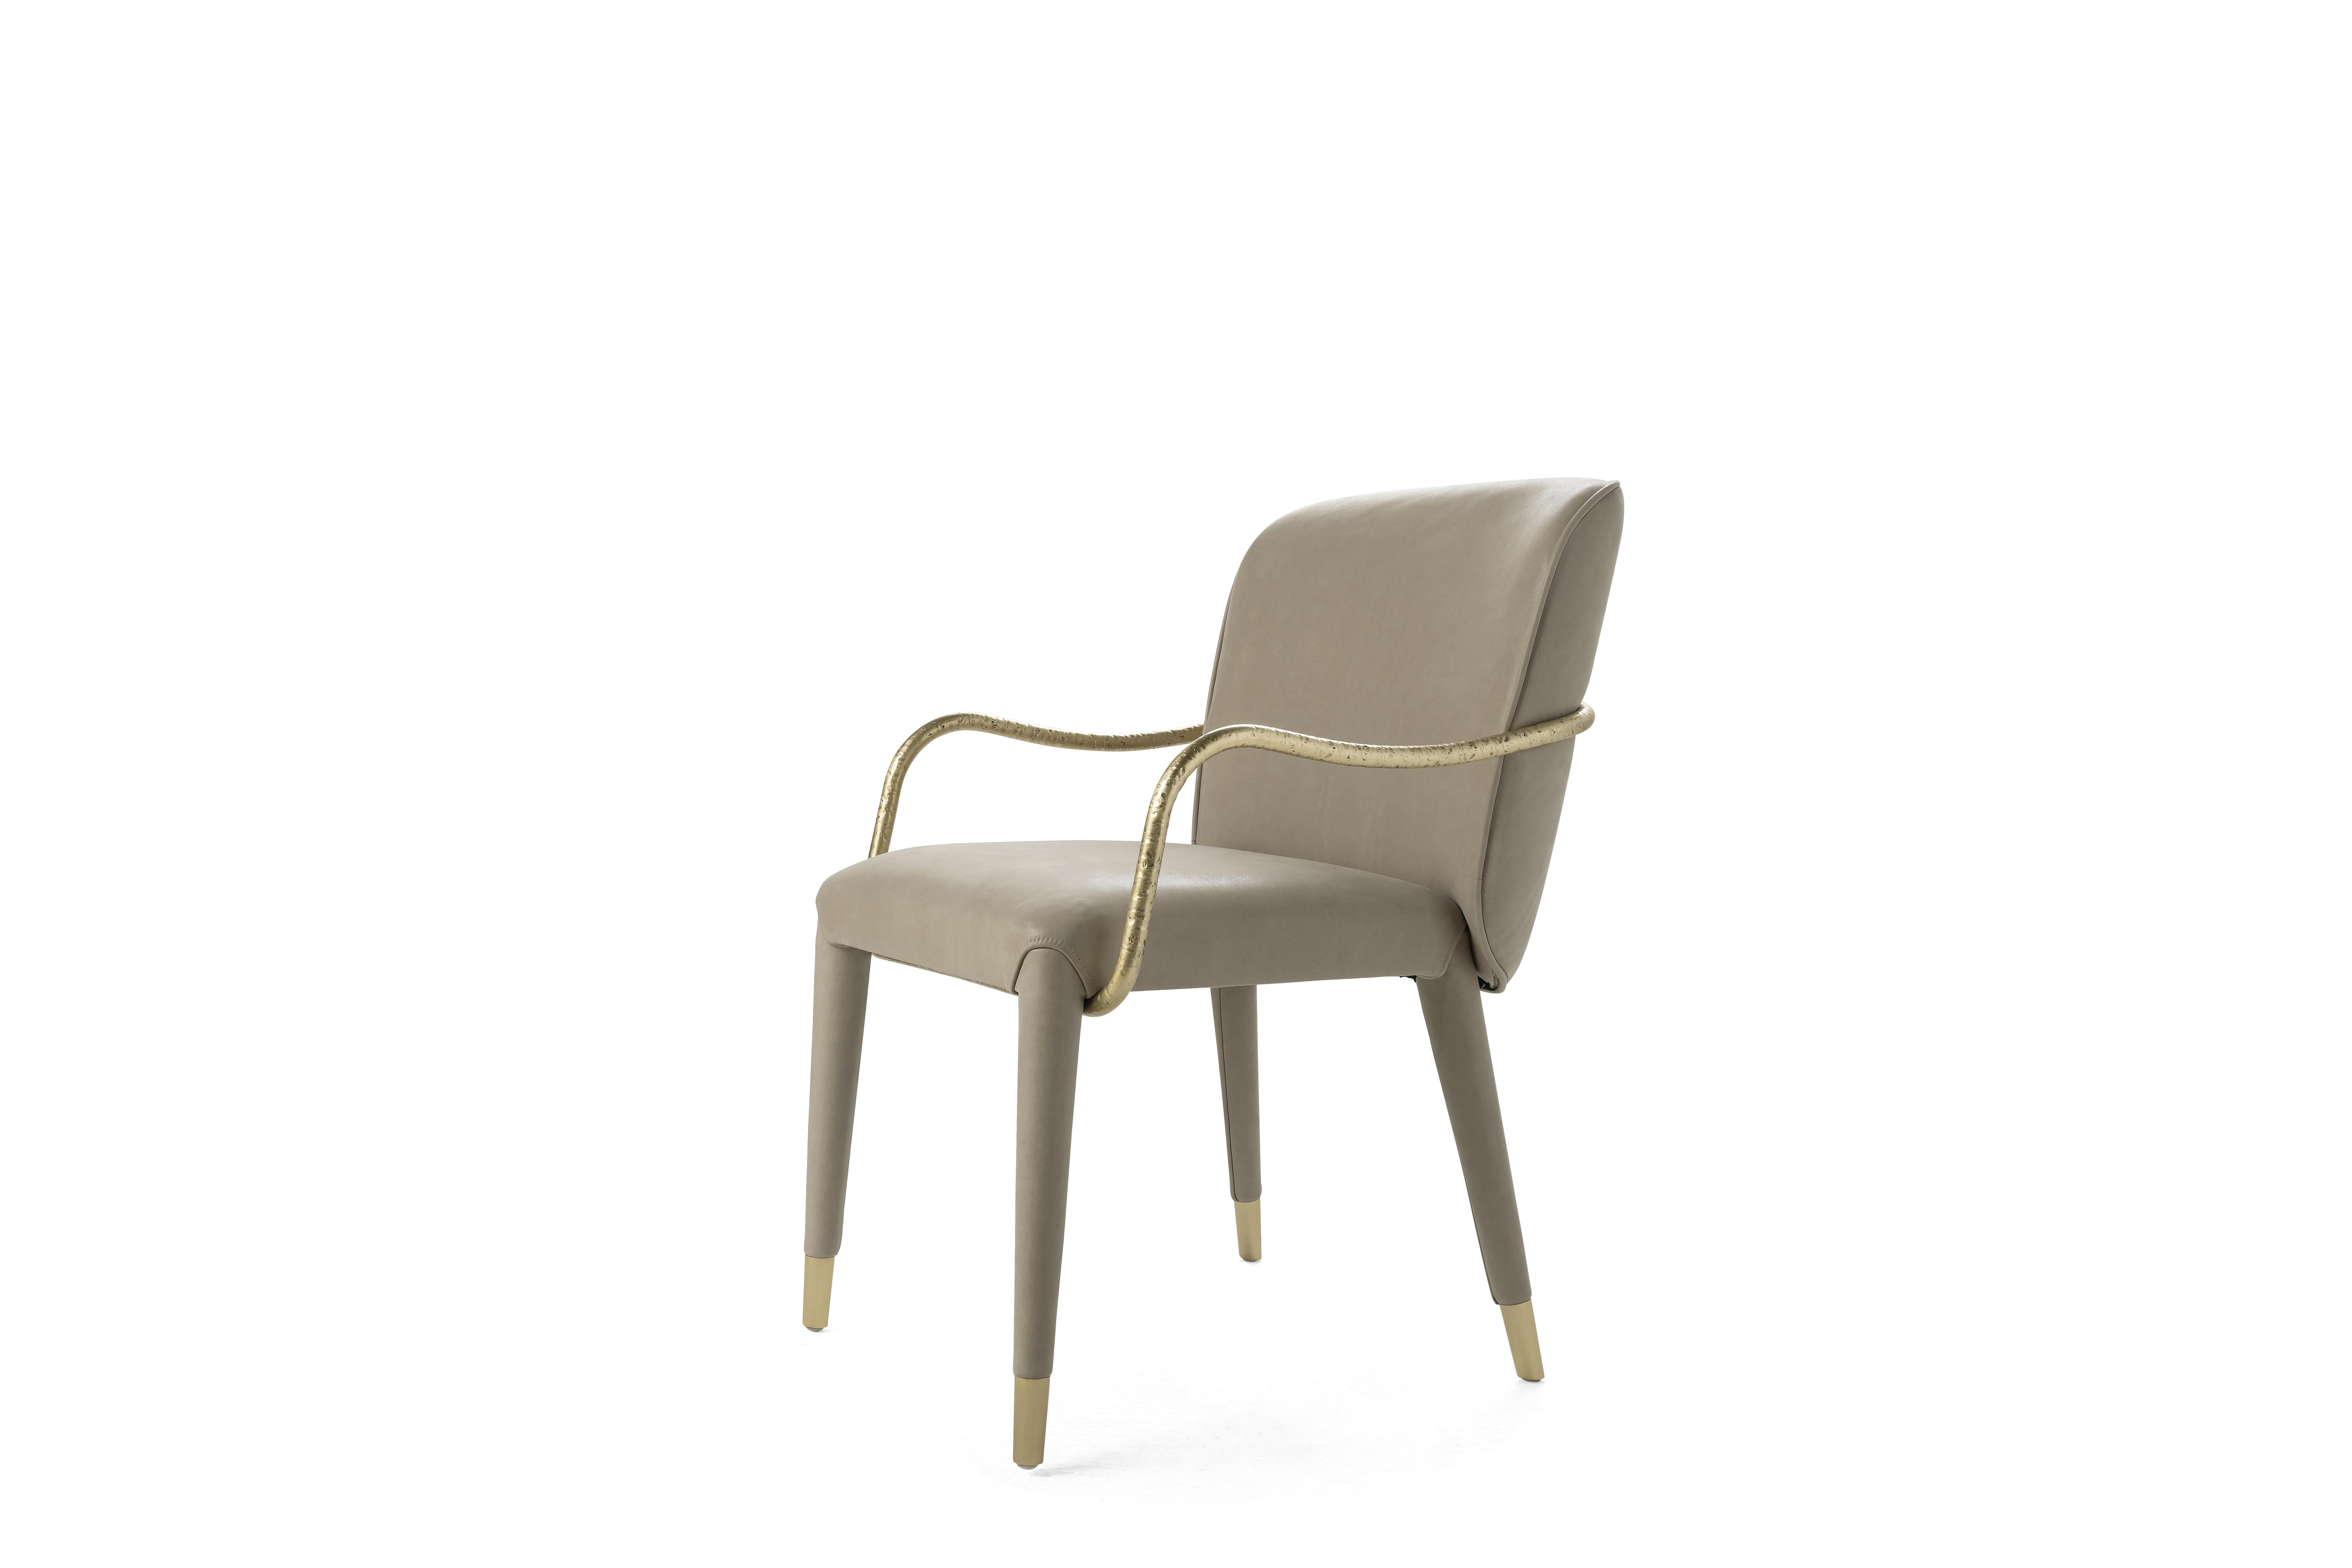 A slim and essential design for the Kivu chair. The thin metal armrest that rotates around the structure is characterized by a particular bush-hammered finish that lends a rough and natural effect to the whole. The chair upholstery is in fabric with